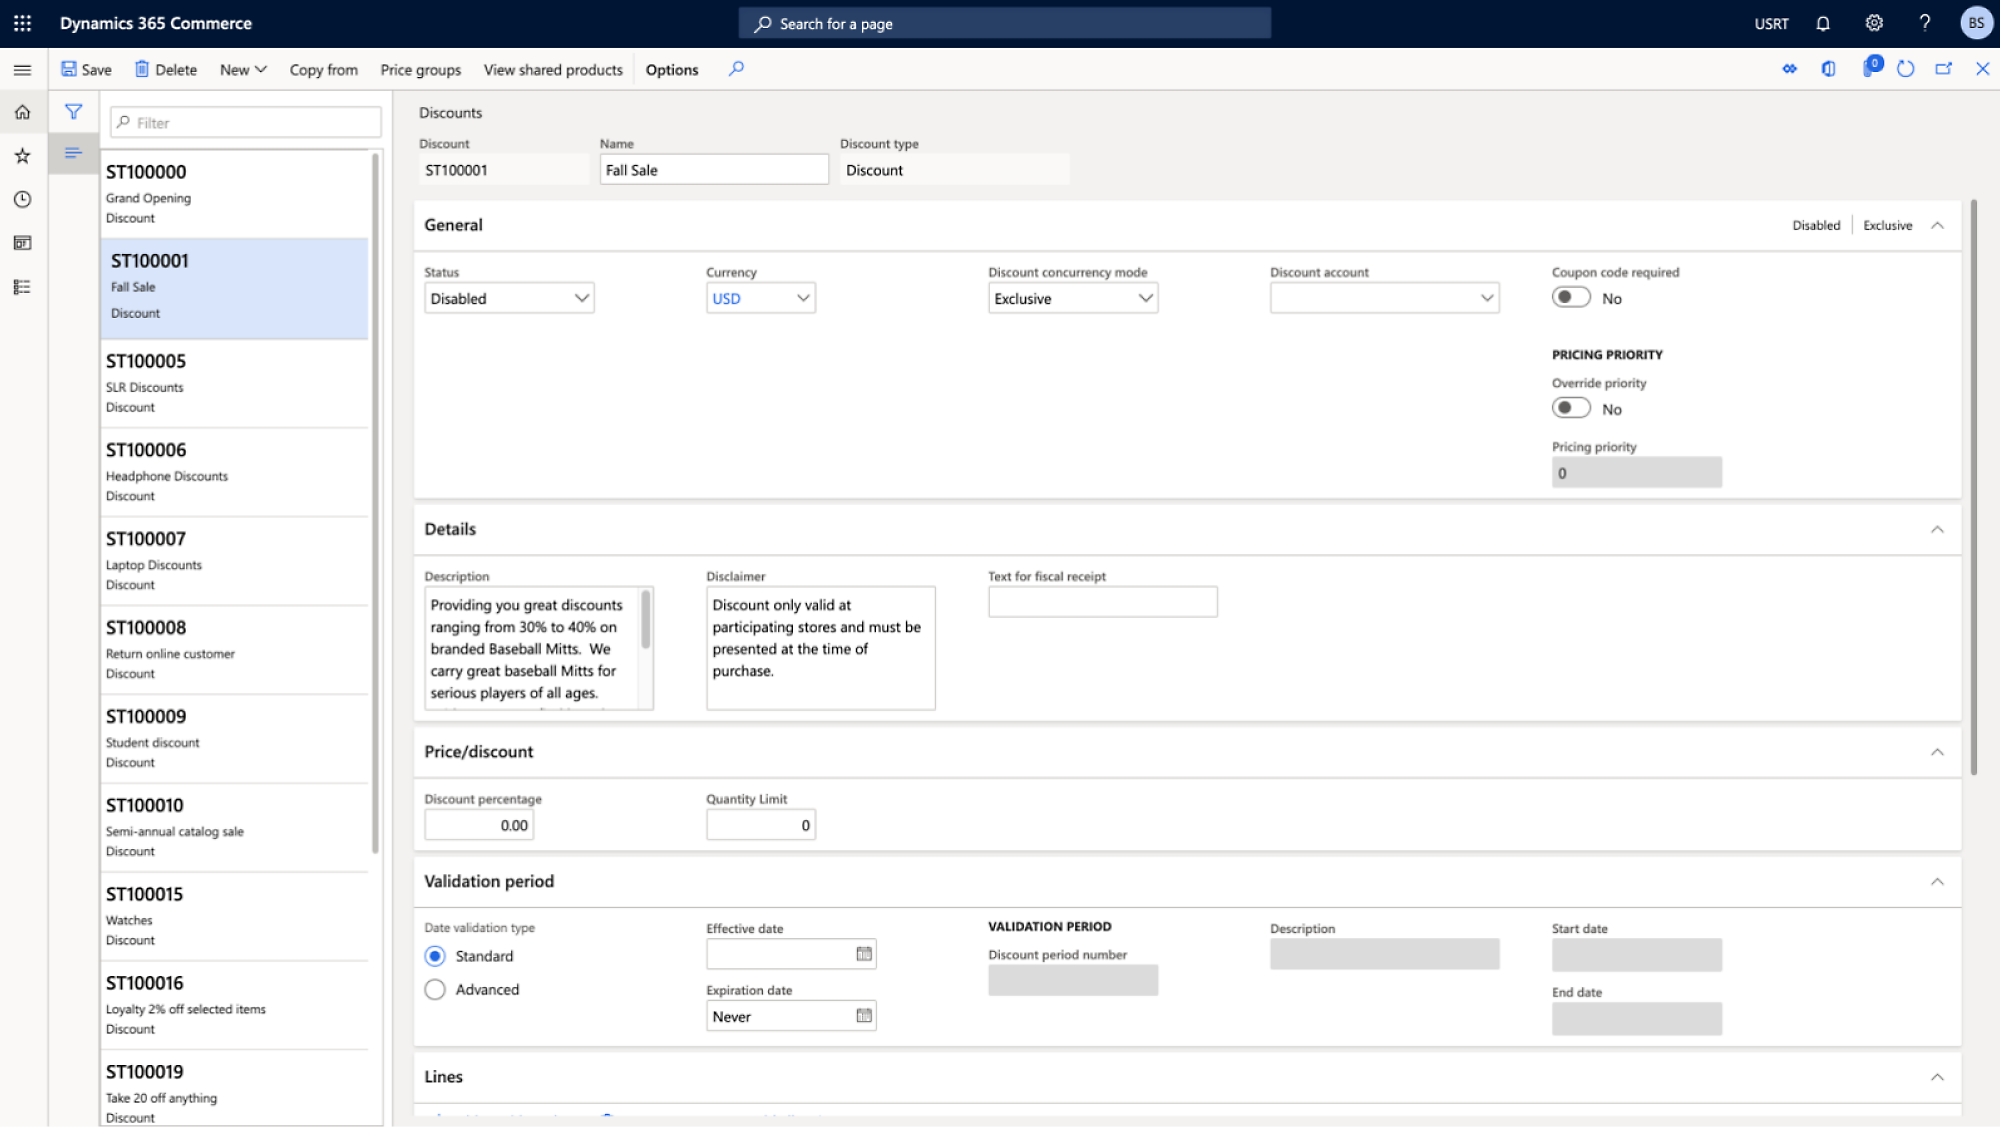 Dynamics 365 Commerce interface showing price groups, shared products, discounts, and validation period for promotions